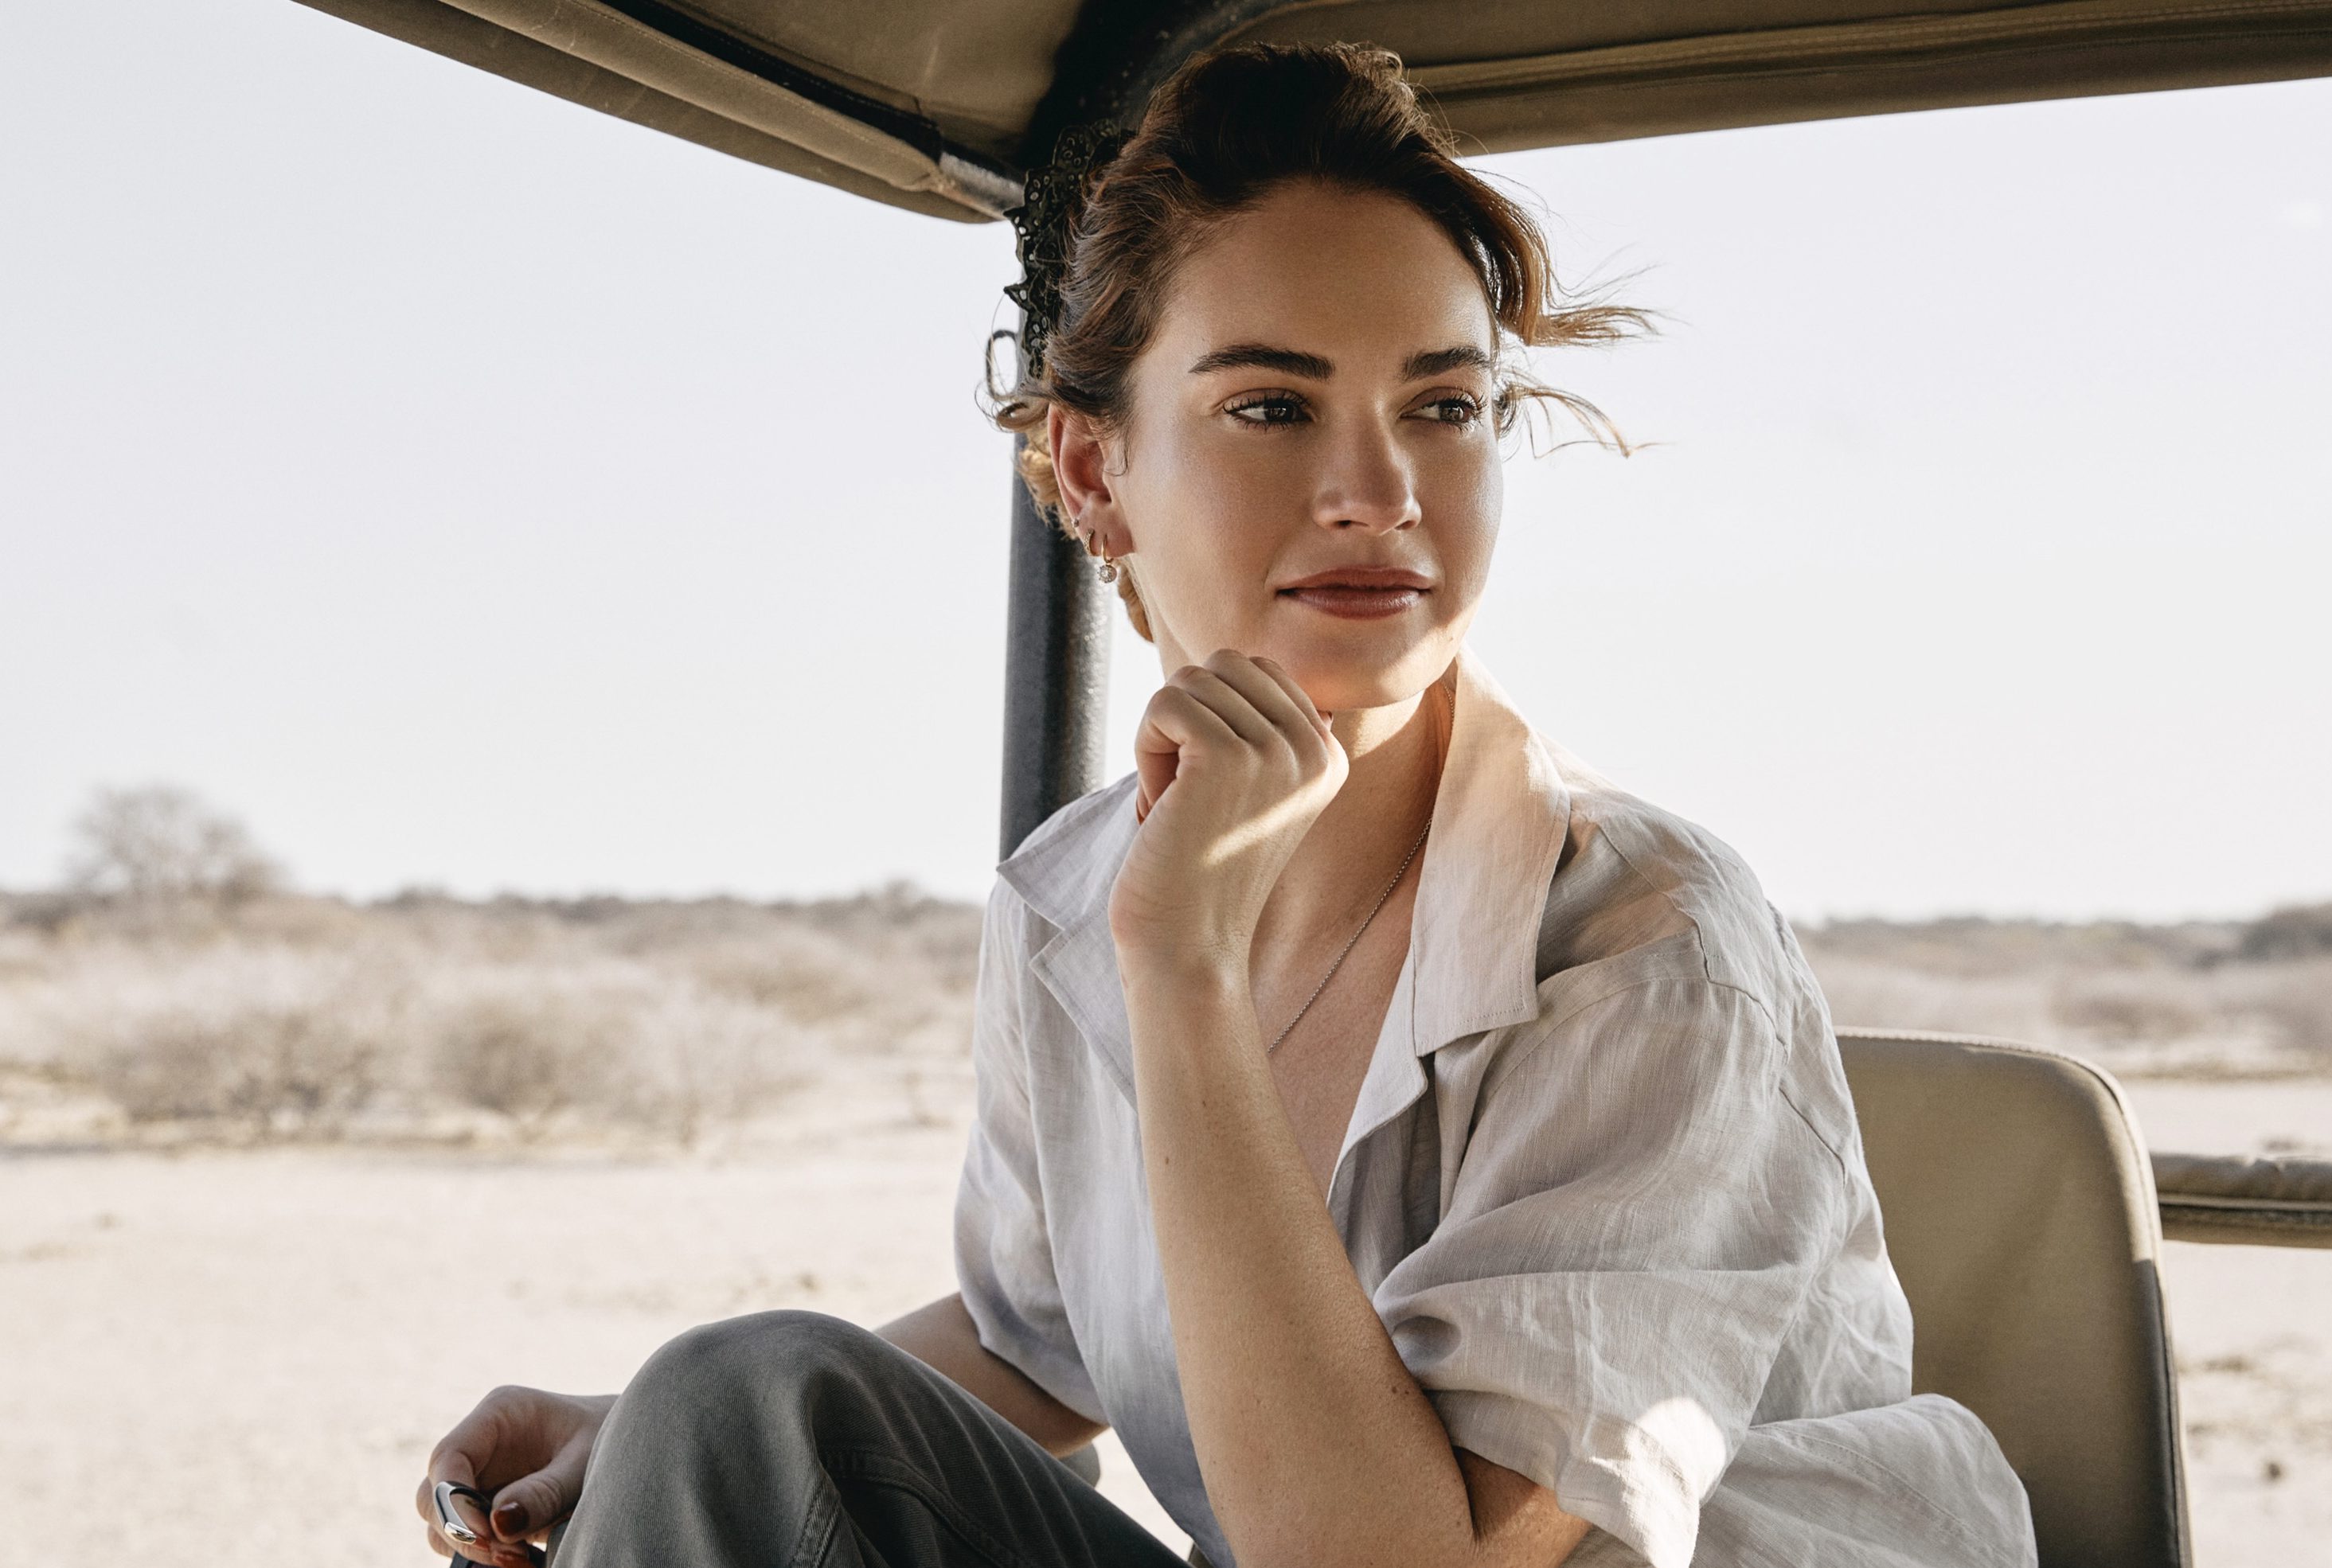 Iron Claw actress Lily James is the Global Ambassador for Only Natural Diamonds, visits the diamond mines of Botswana.